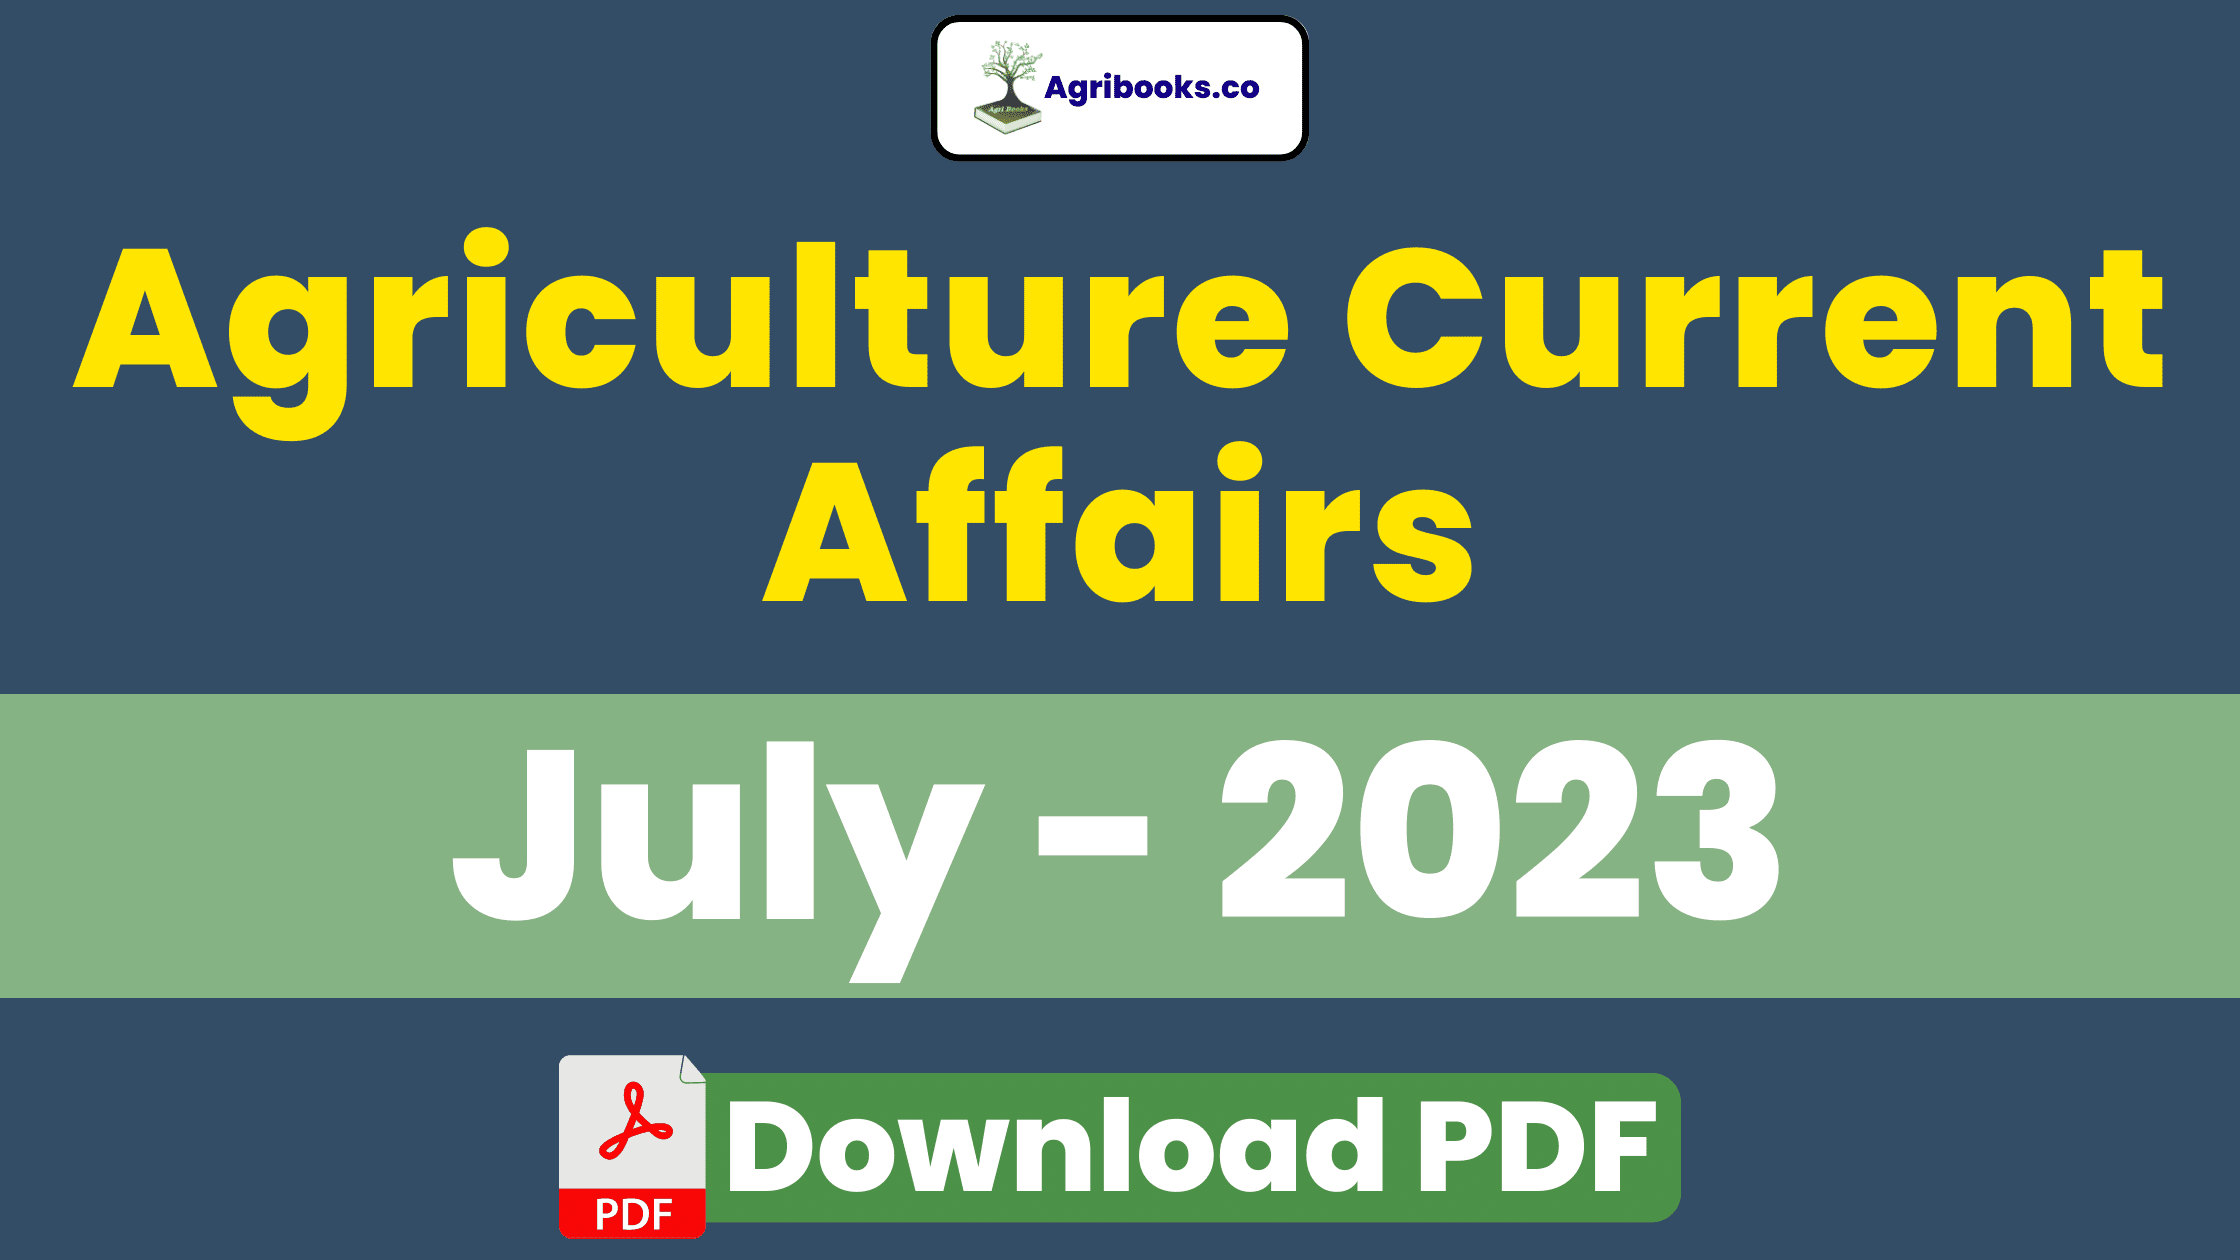 Agriculture Current Affairs July 2023